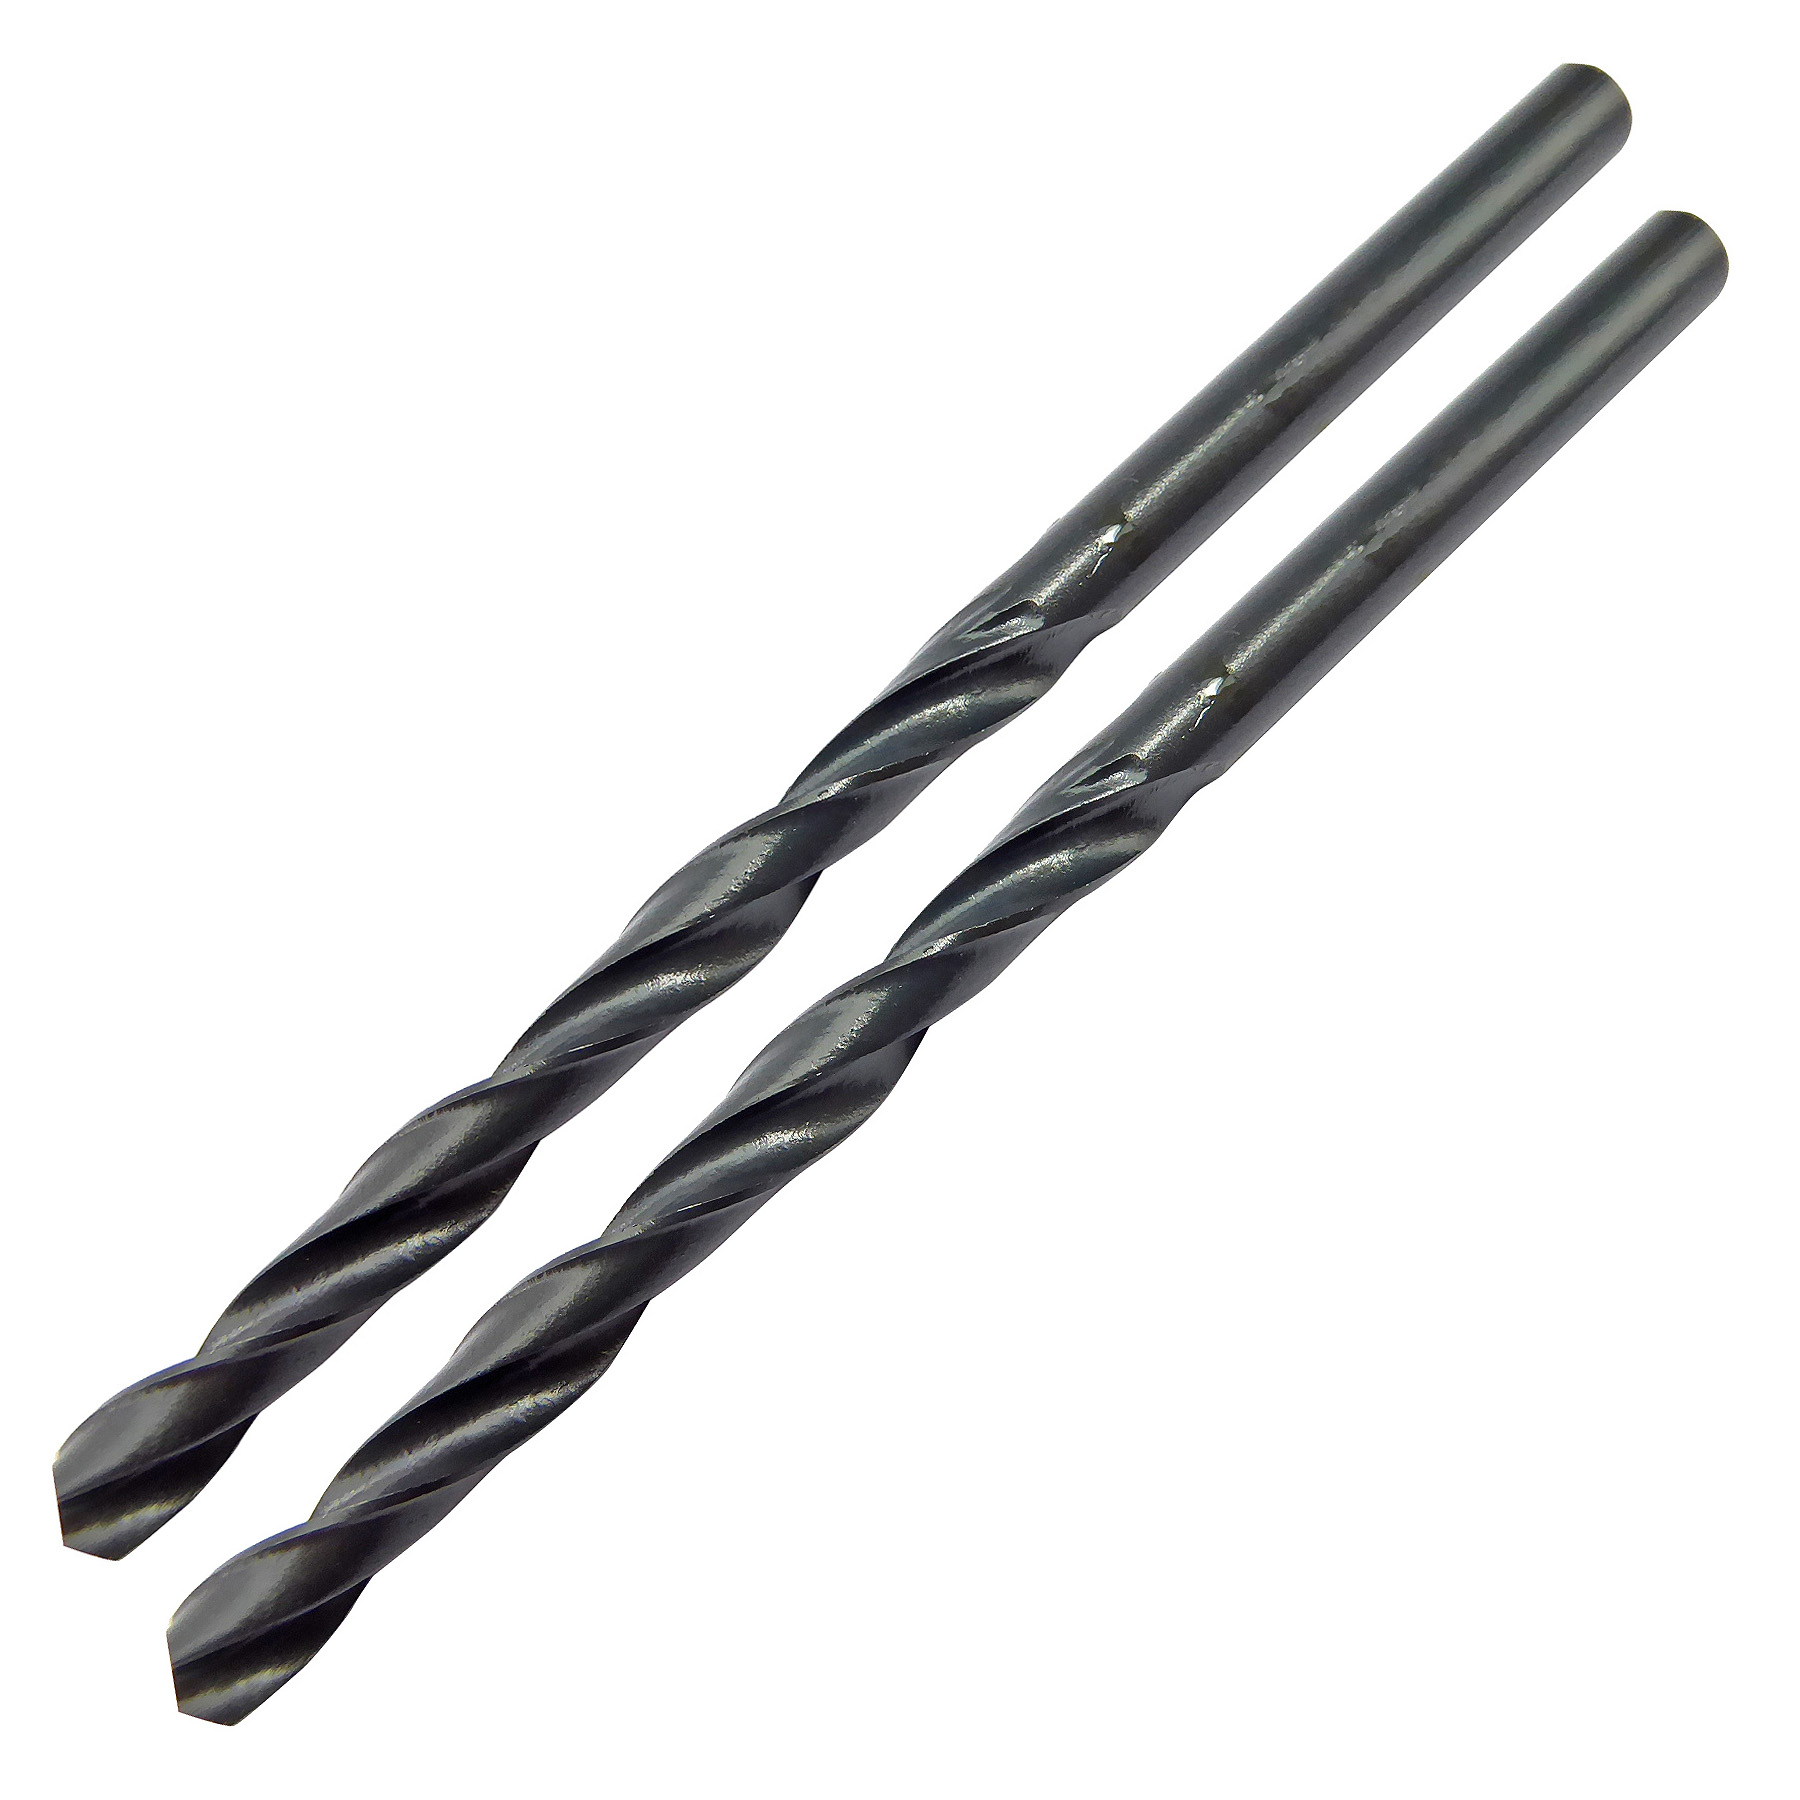 4.5mm x 80mm HSS Roll Forged Jobber Drill Pack of 2